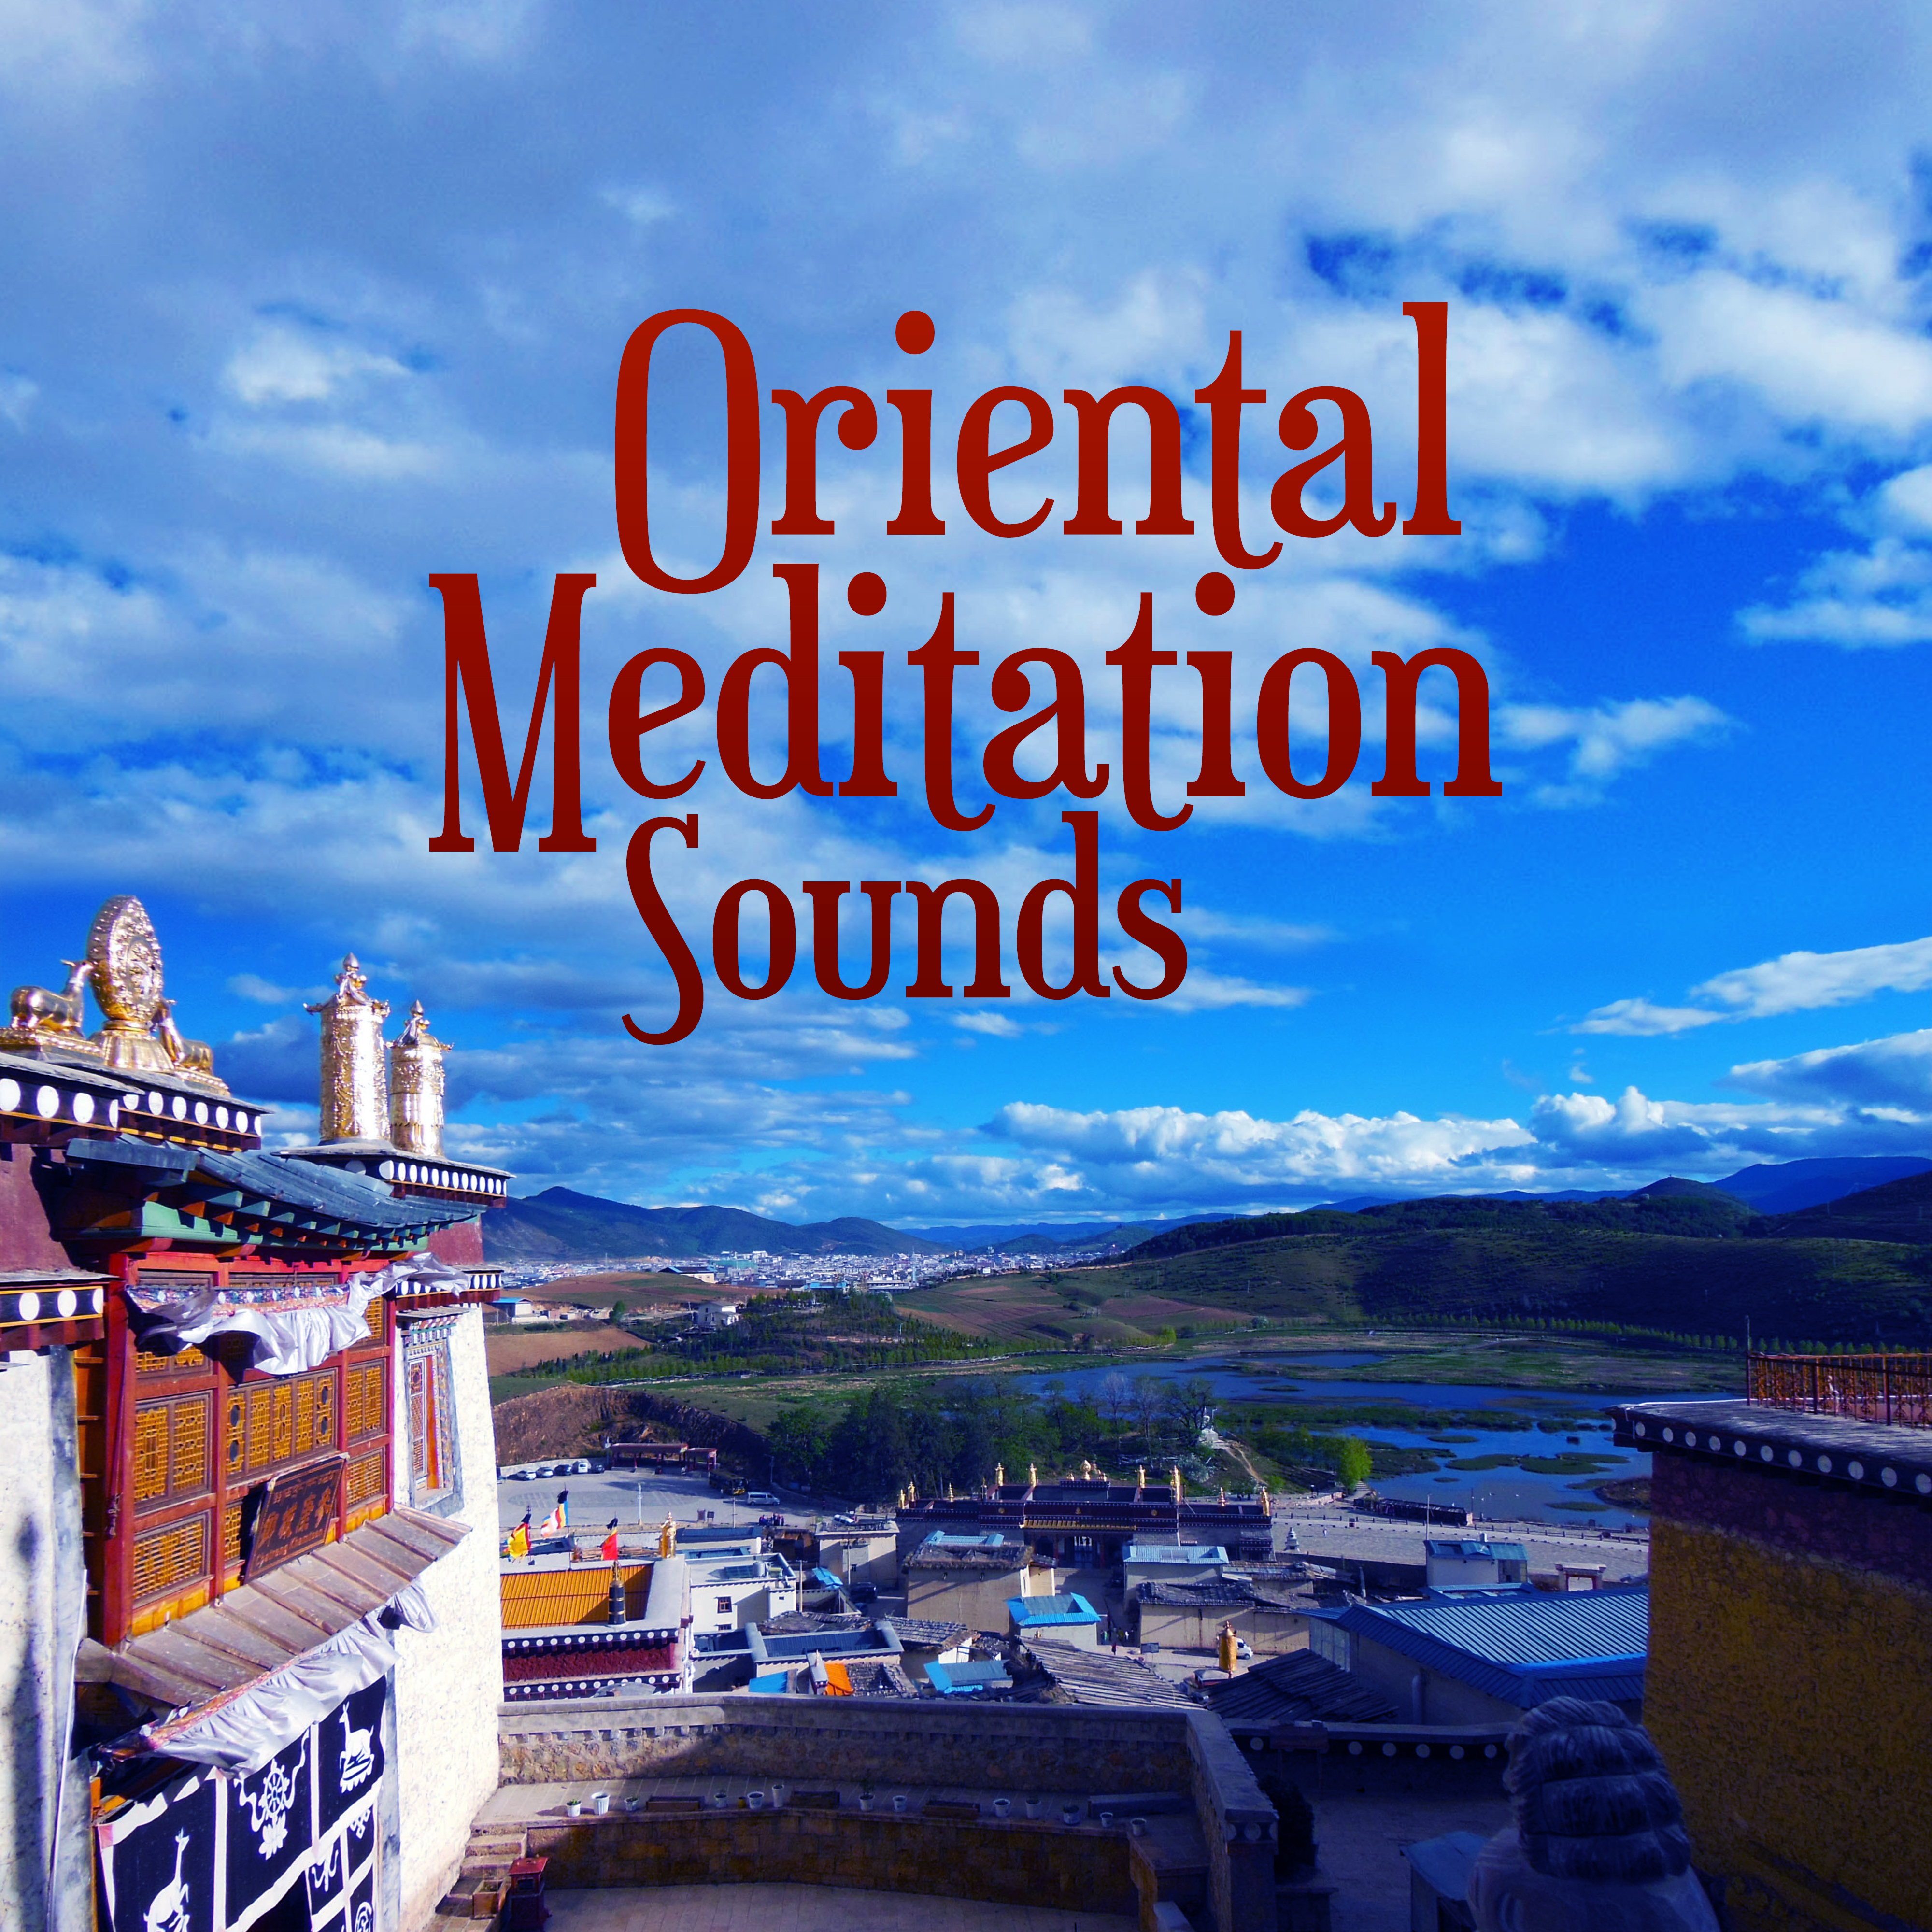 Oriental Meditation Sounds – Inner Peace, Melodies to Calm Down, Spiritual Rest, Peaceful Mind